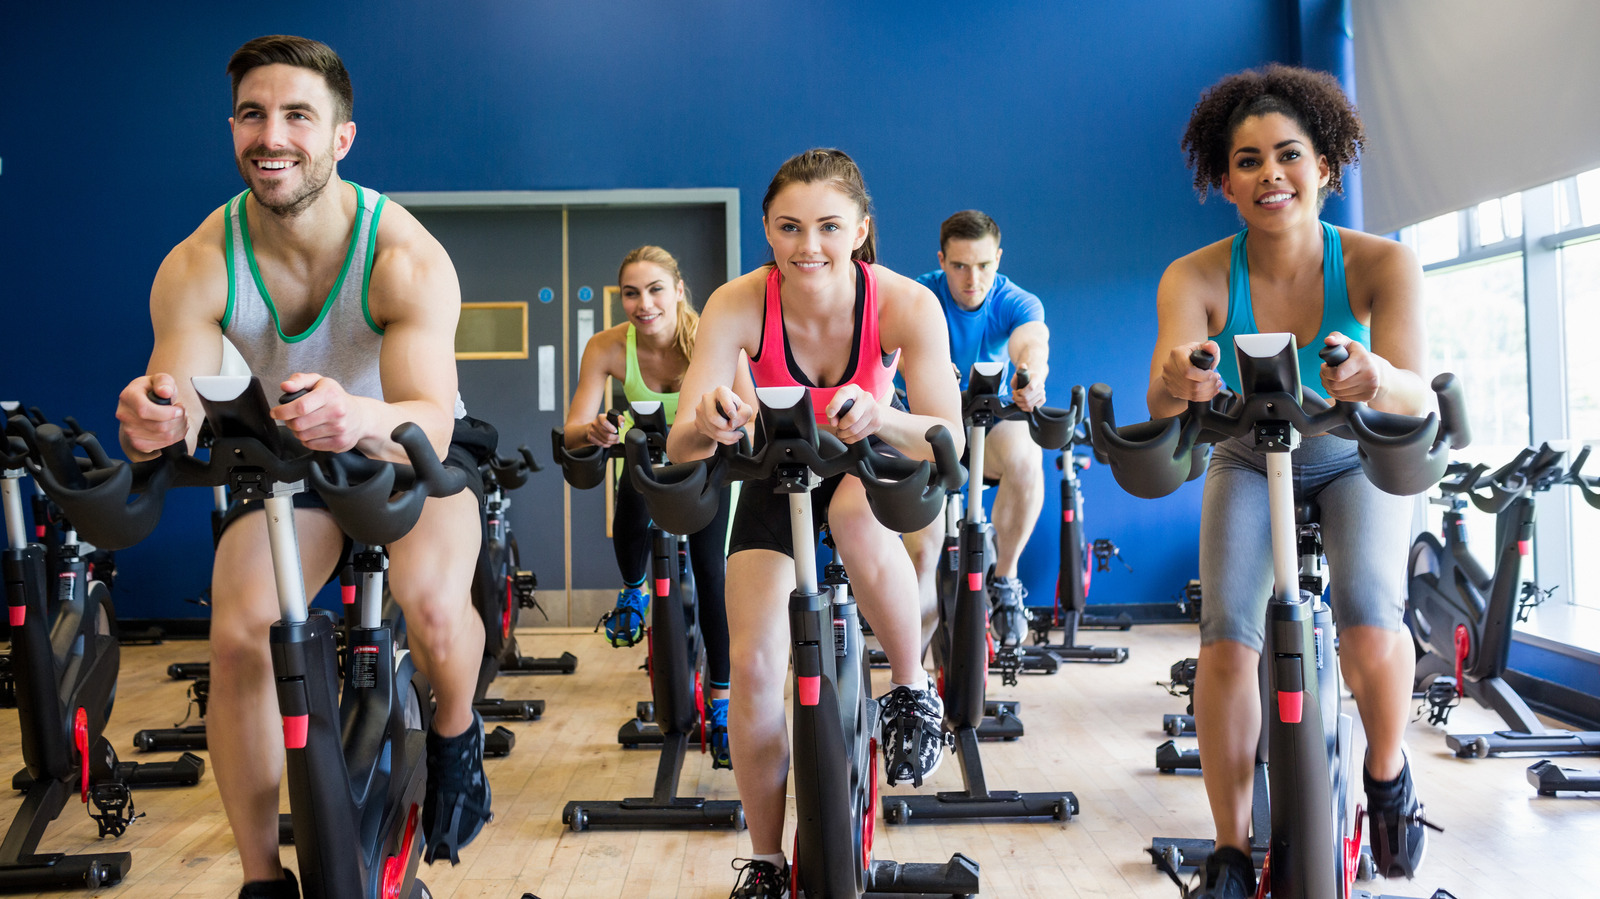 Yoga and Indoor cycling: an excellent combination